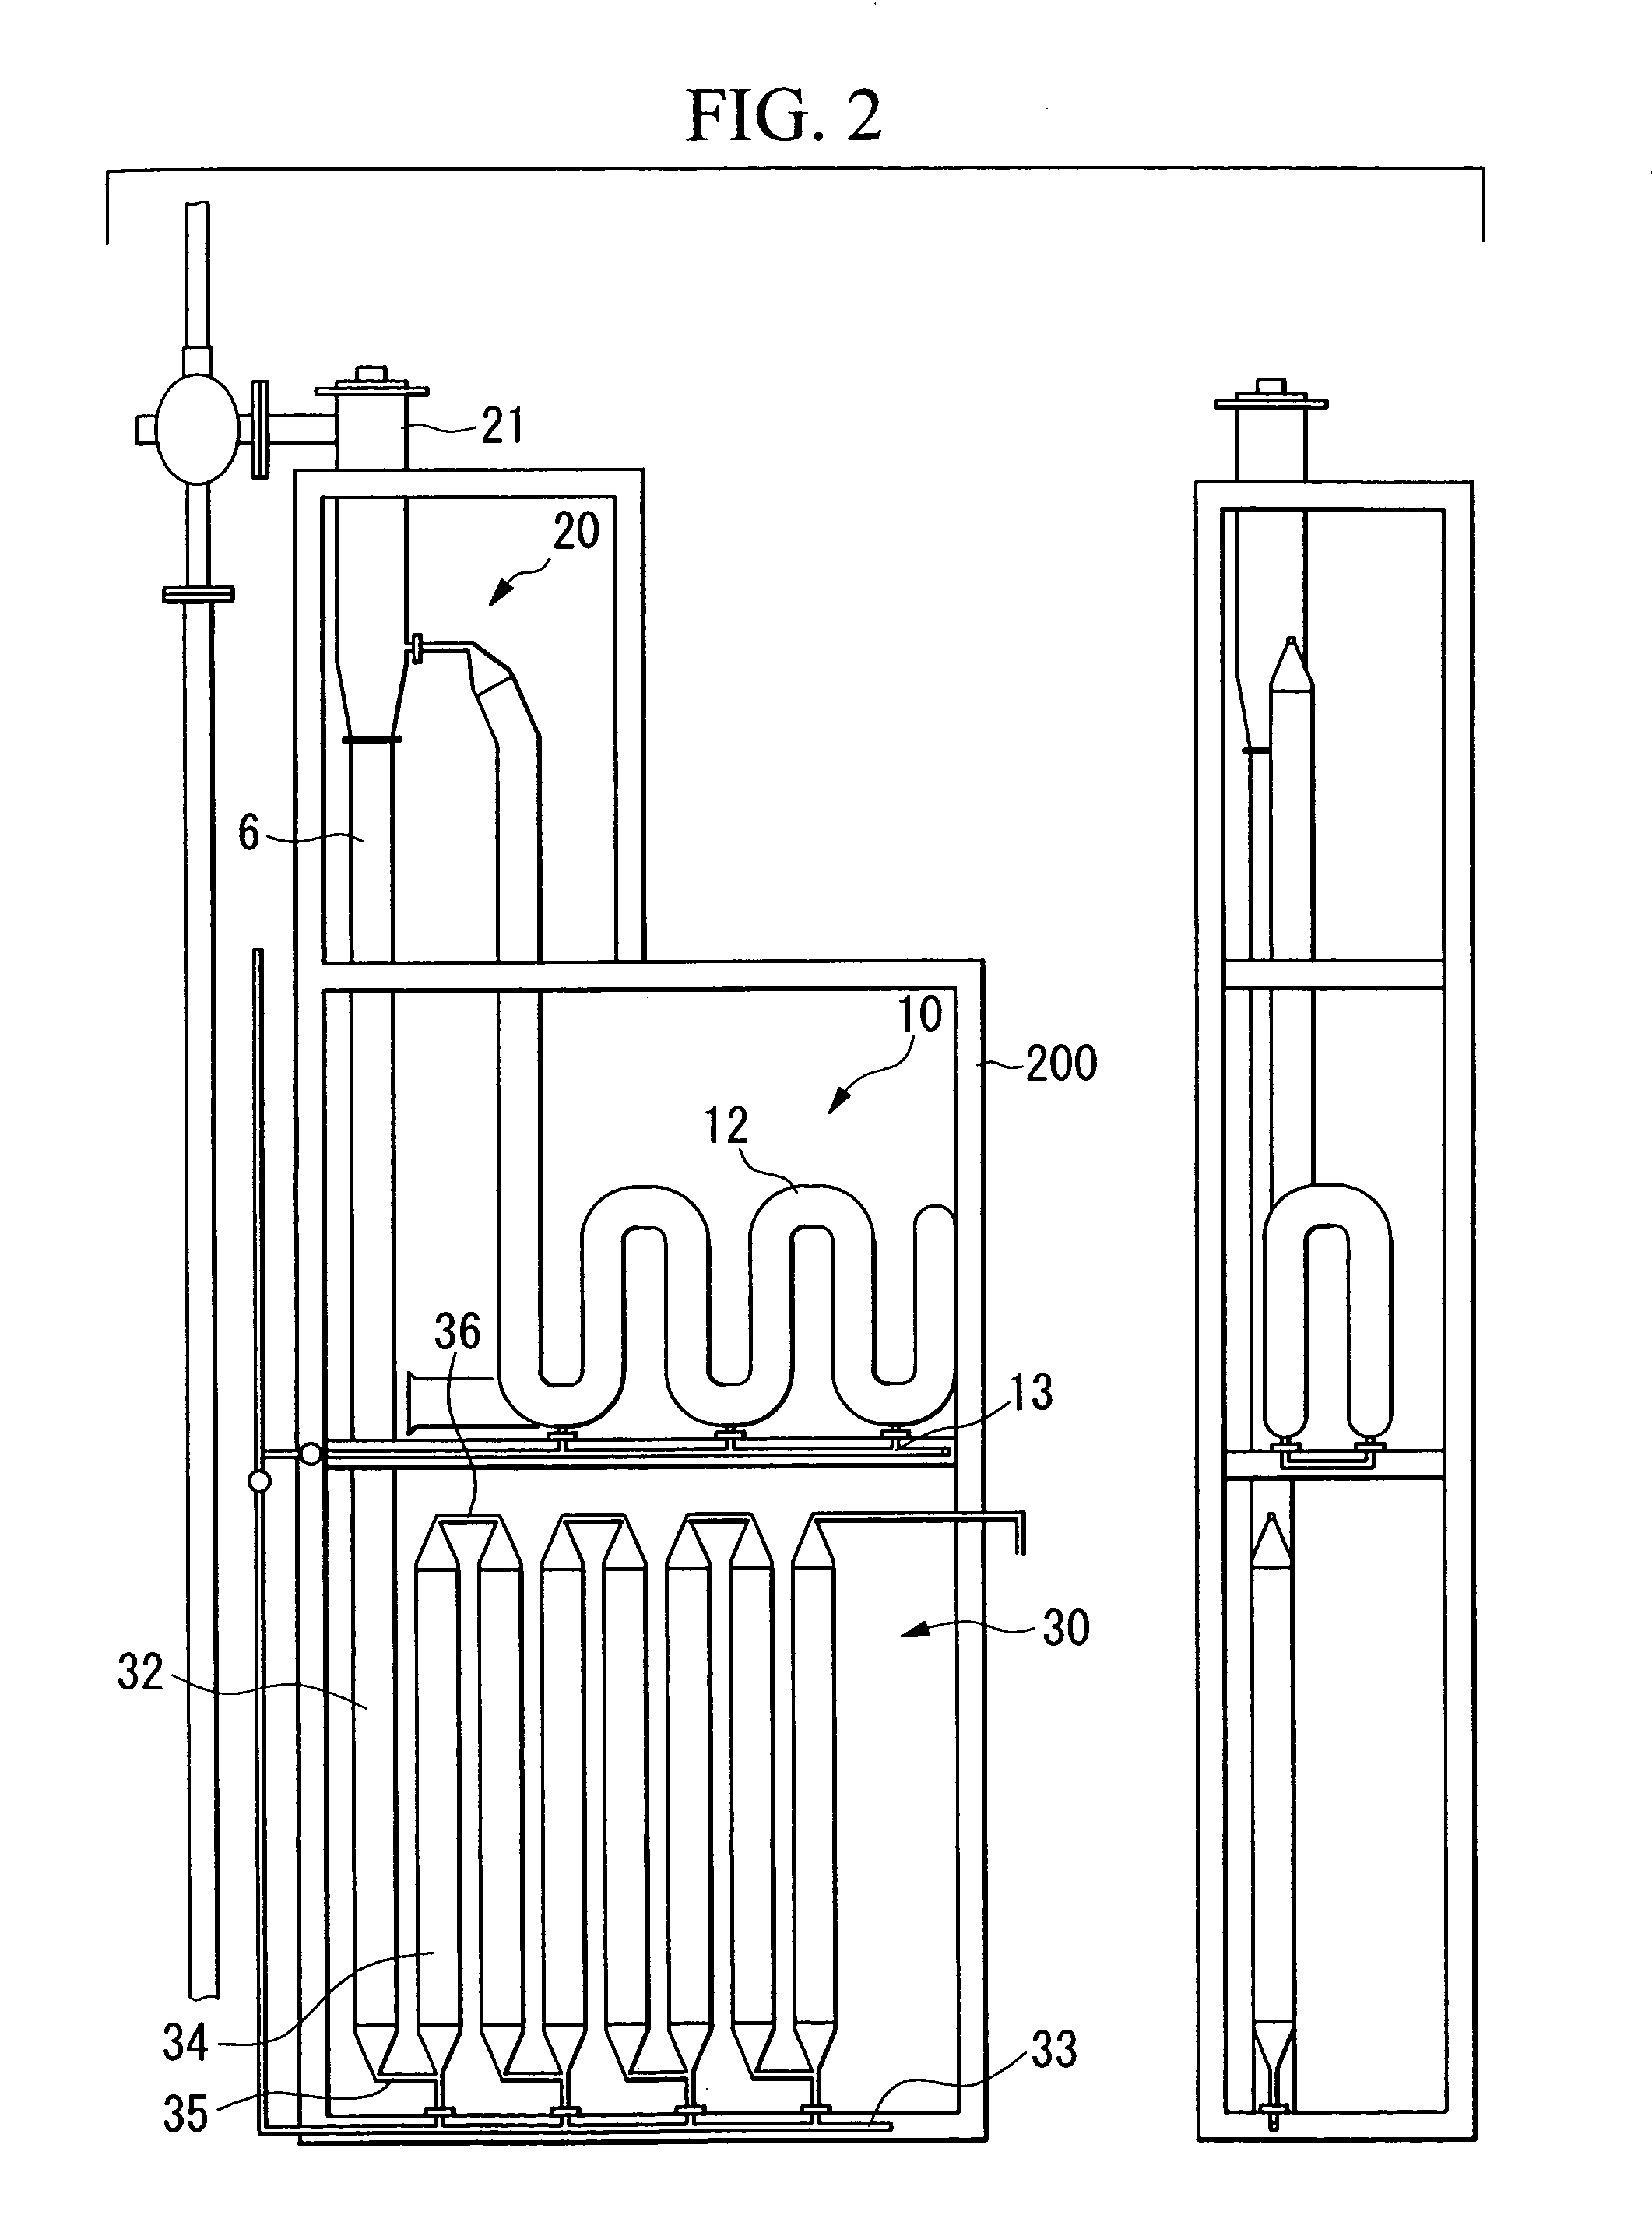 Production method for processed soybean food products and apparatus for thermal deaeration of soybean slurry